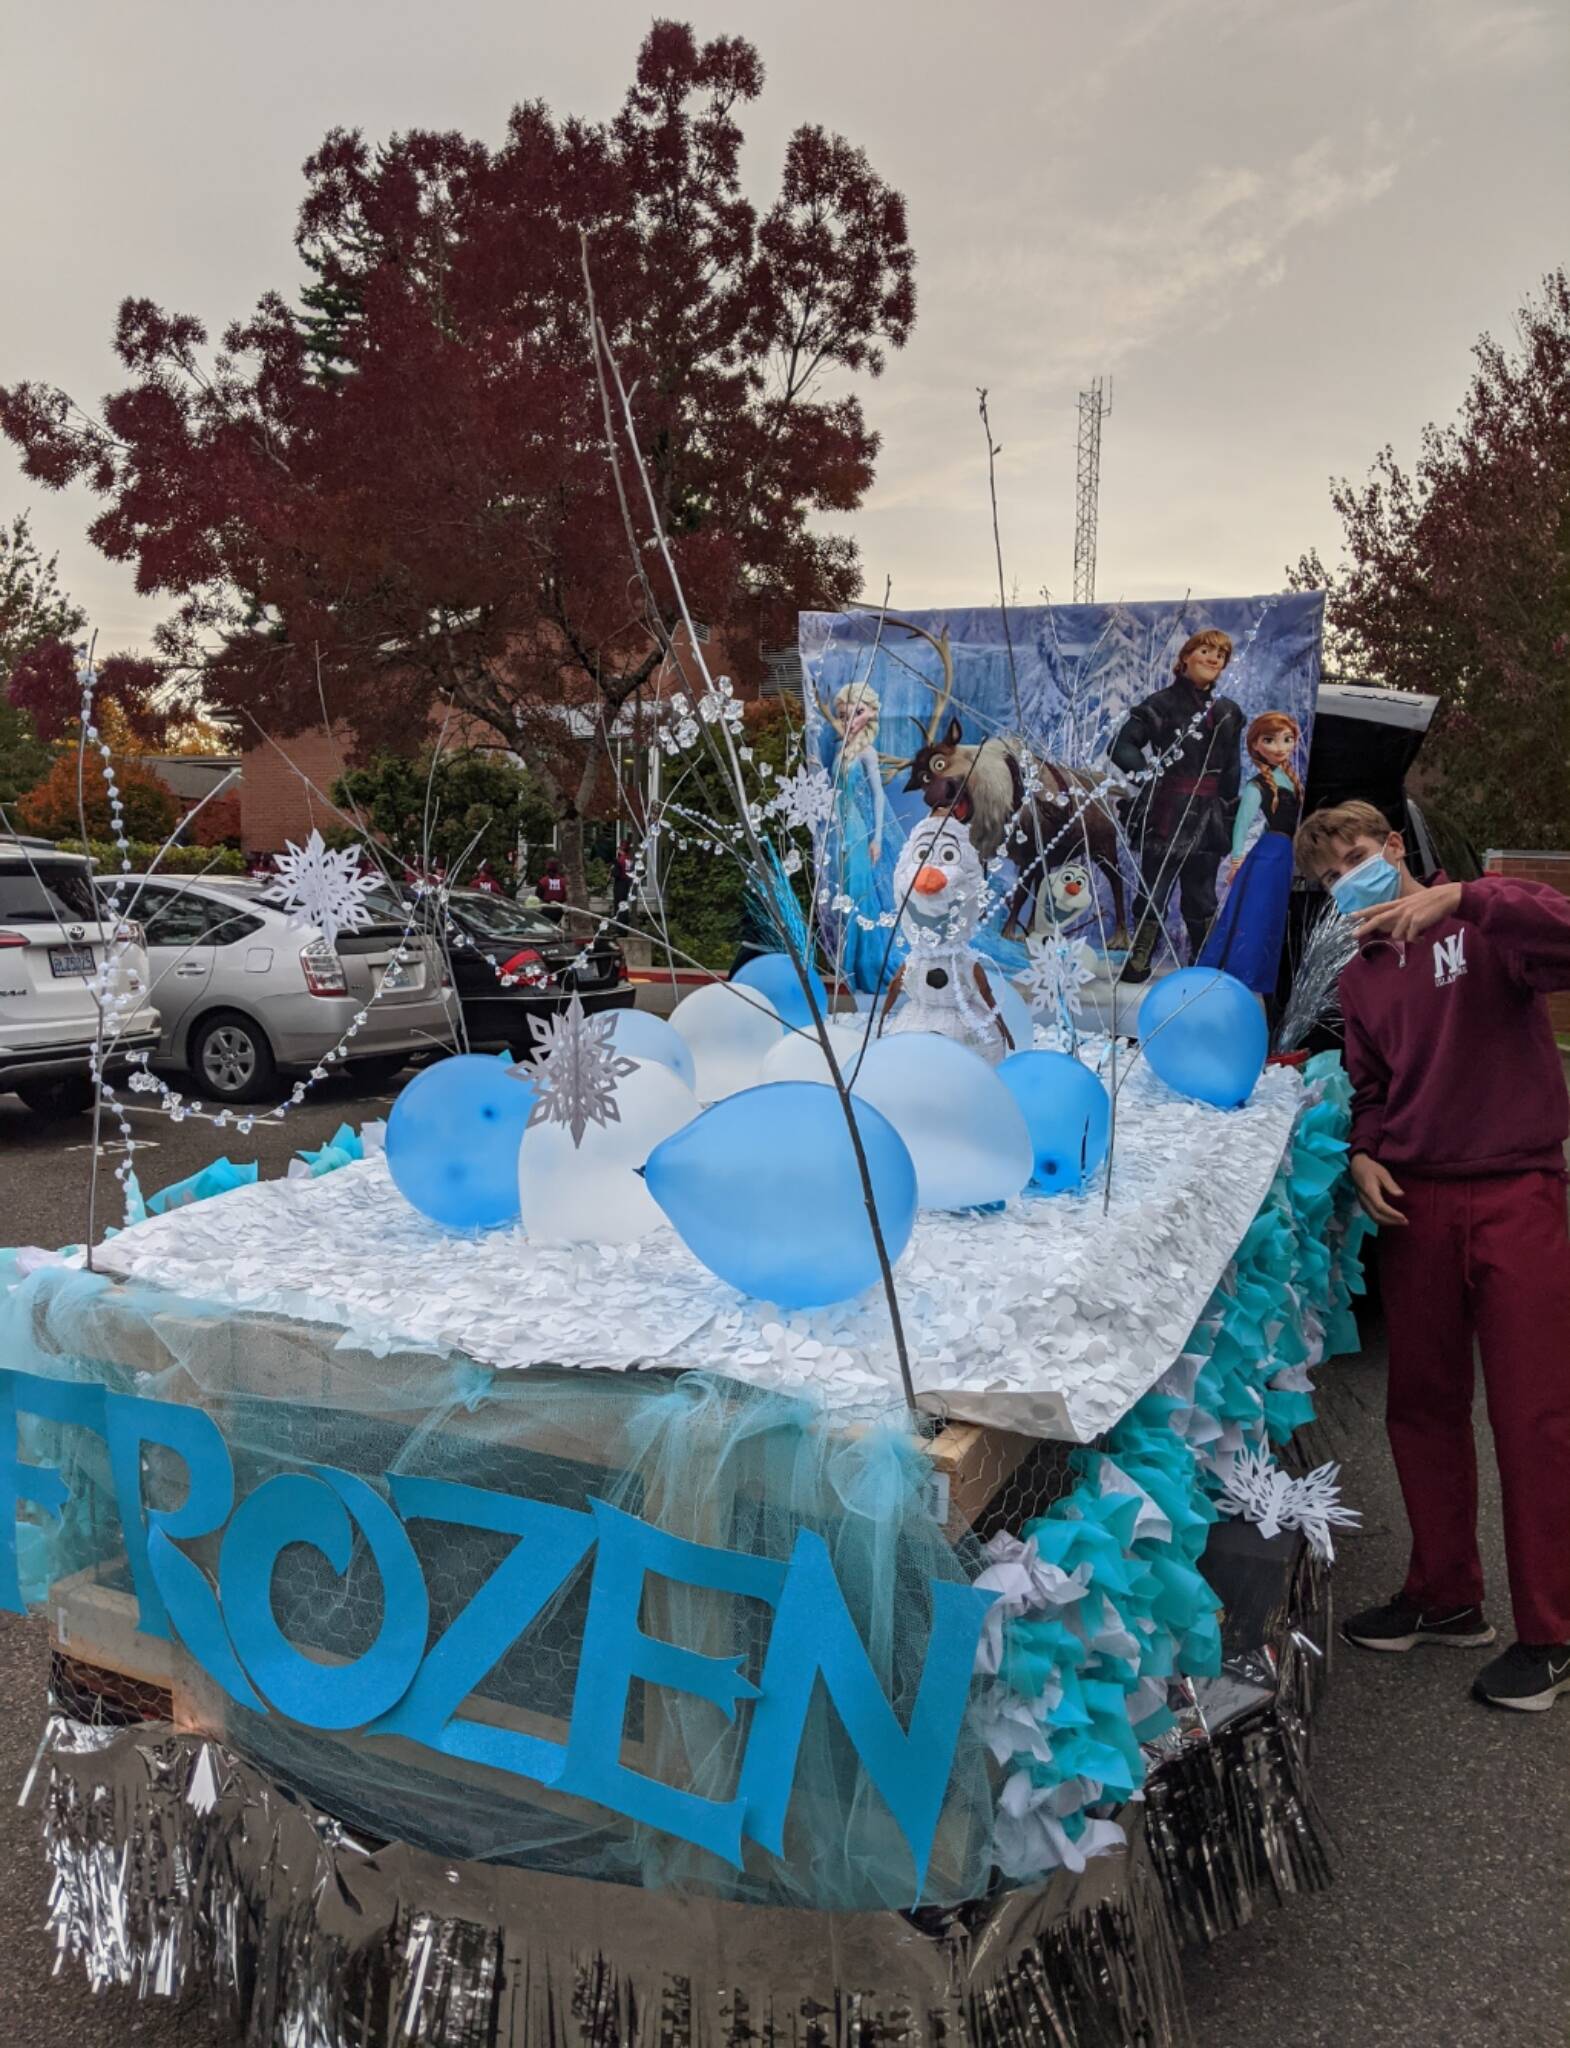 A “Frozen” float makes an appearance at last year’s Mercer Island High School Homecoming Parade. Photo courtesy of the Mercer Island School District